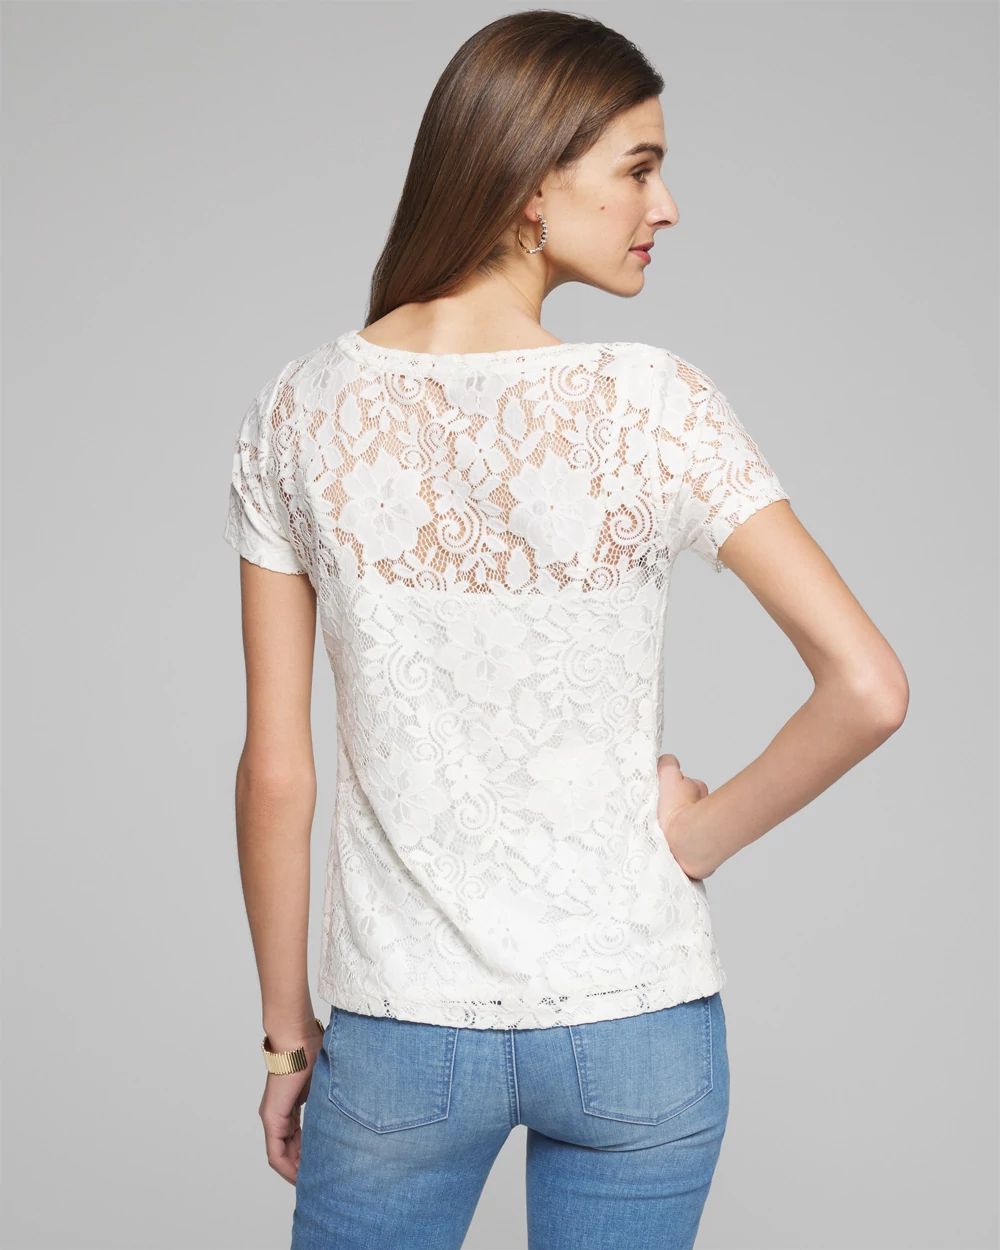 Outlet WHBM Short Sleeve Lace Top click to view larger image.